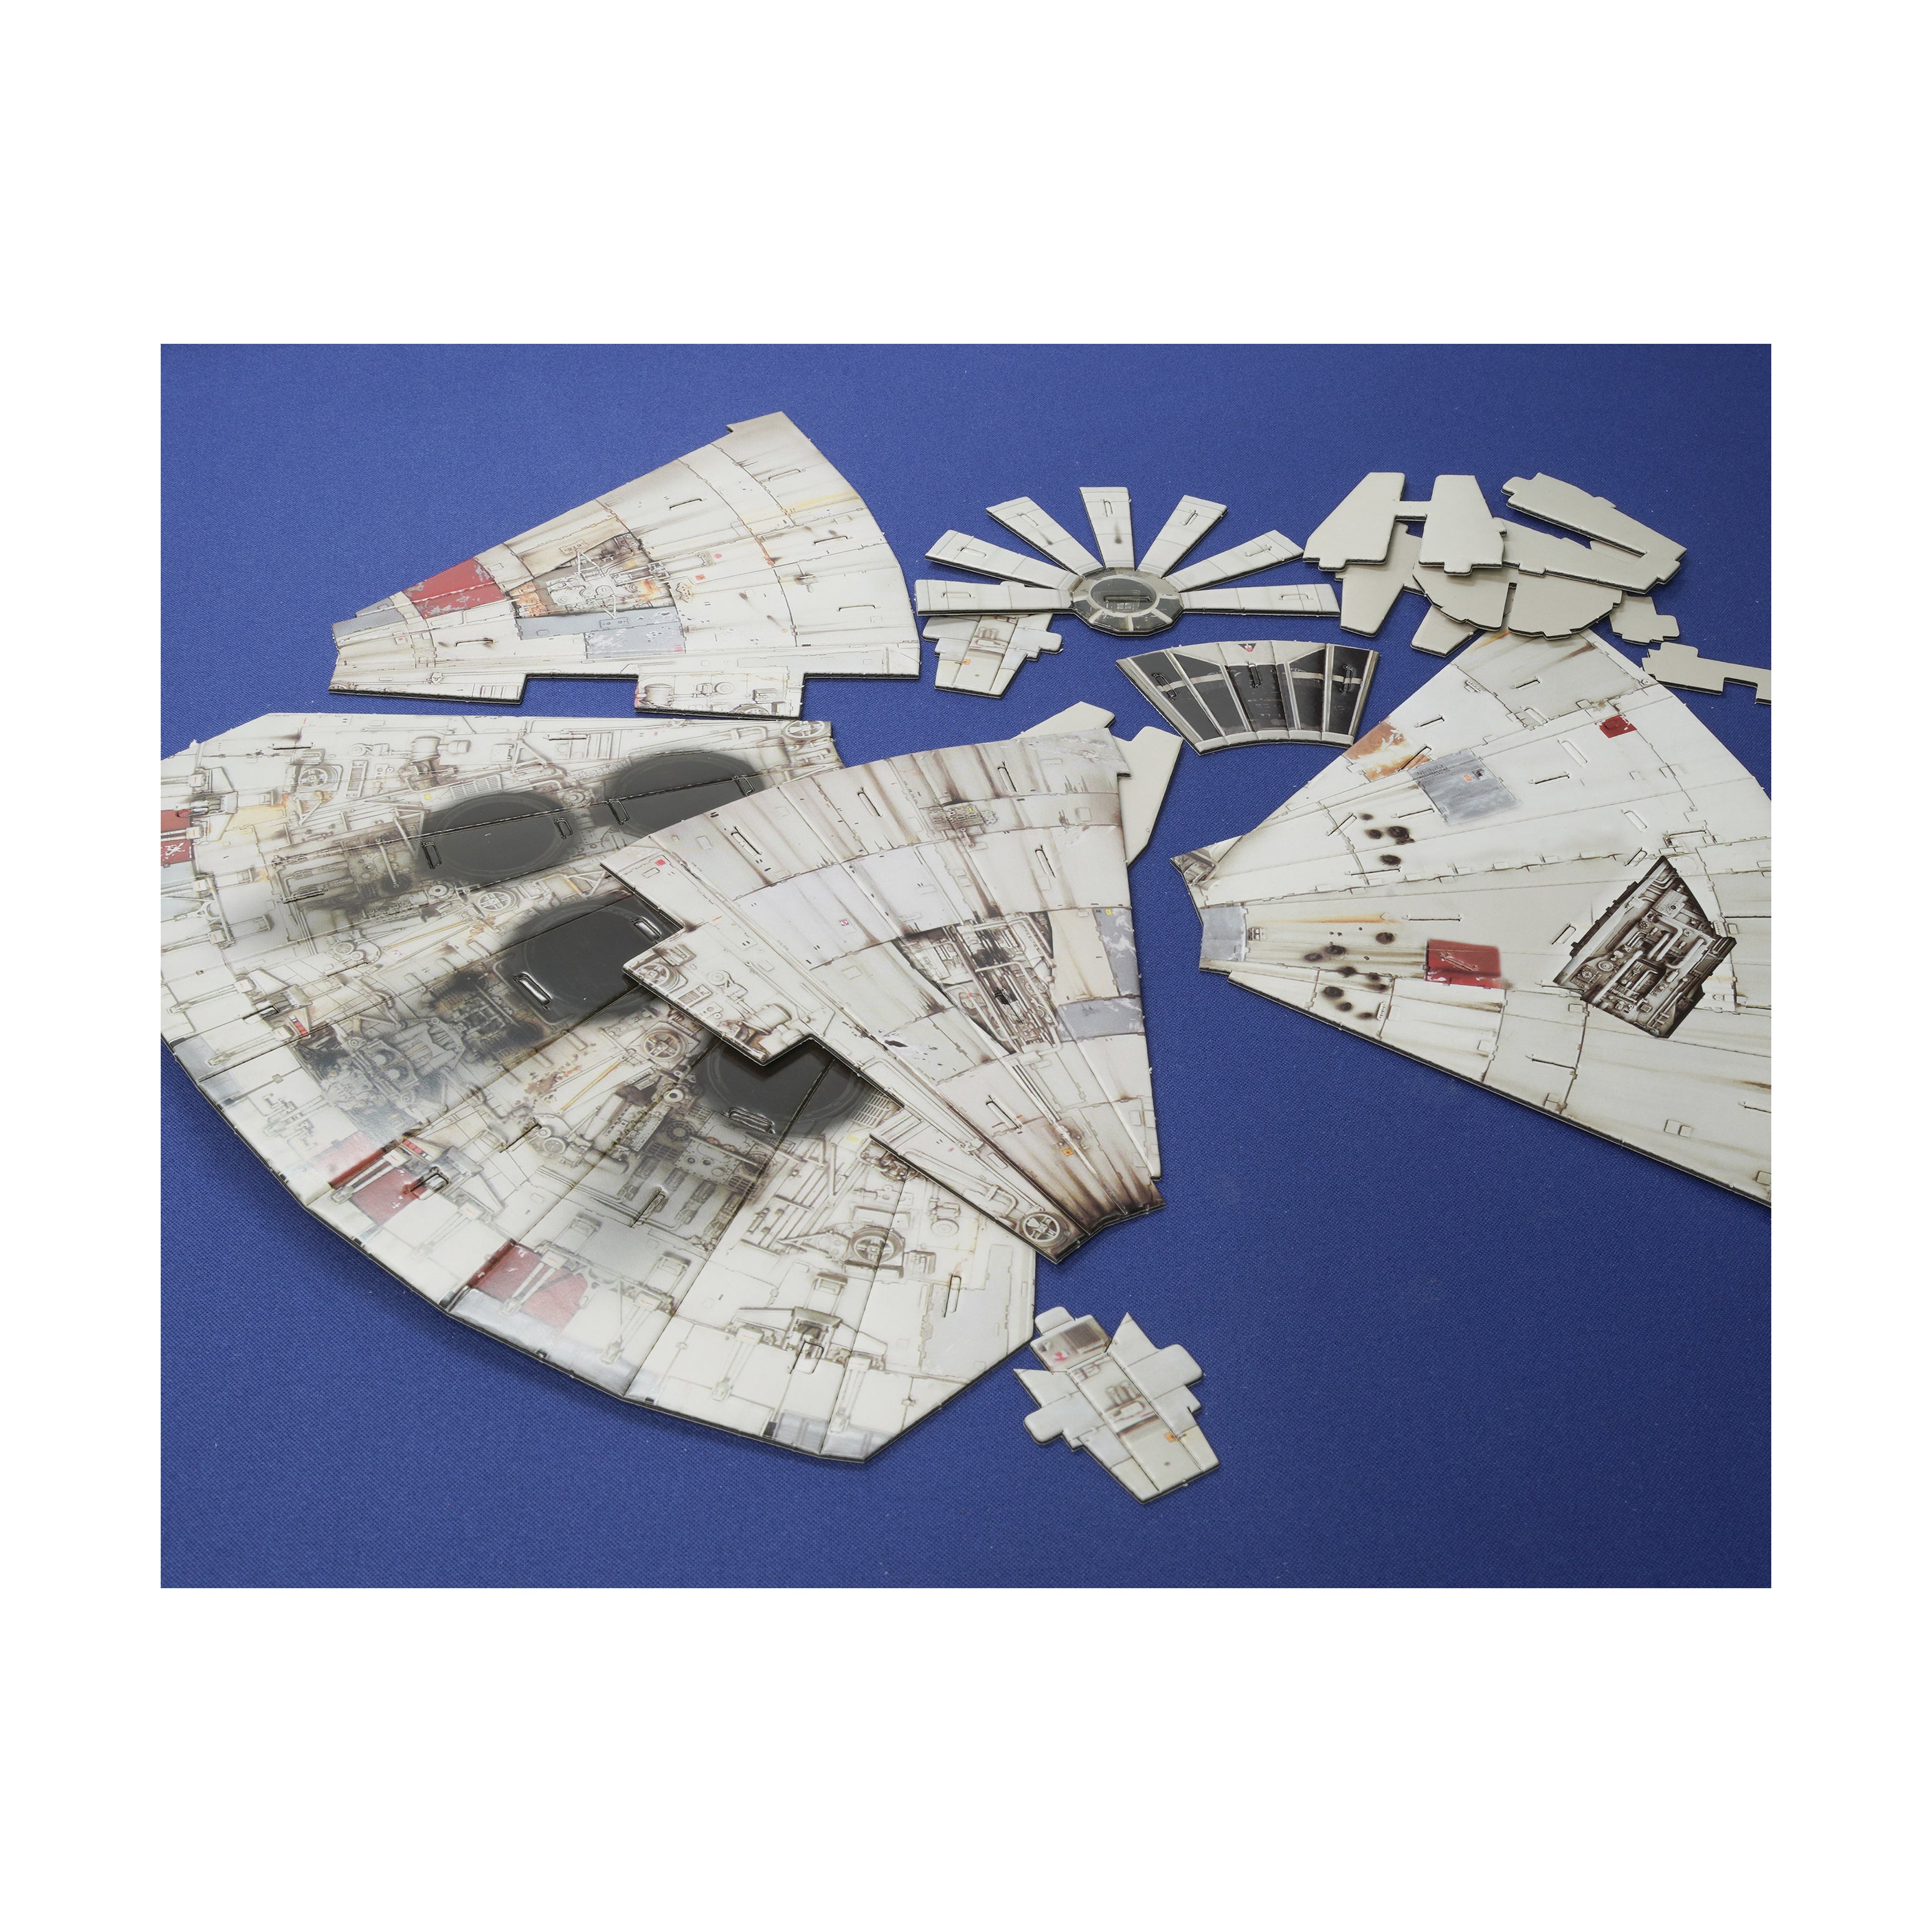 Buy Star Wars Millennium Falcon 3D Model Kit Puzzle, Jigsaws and puzzles